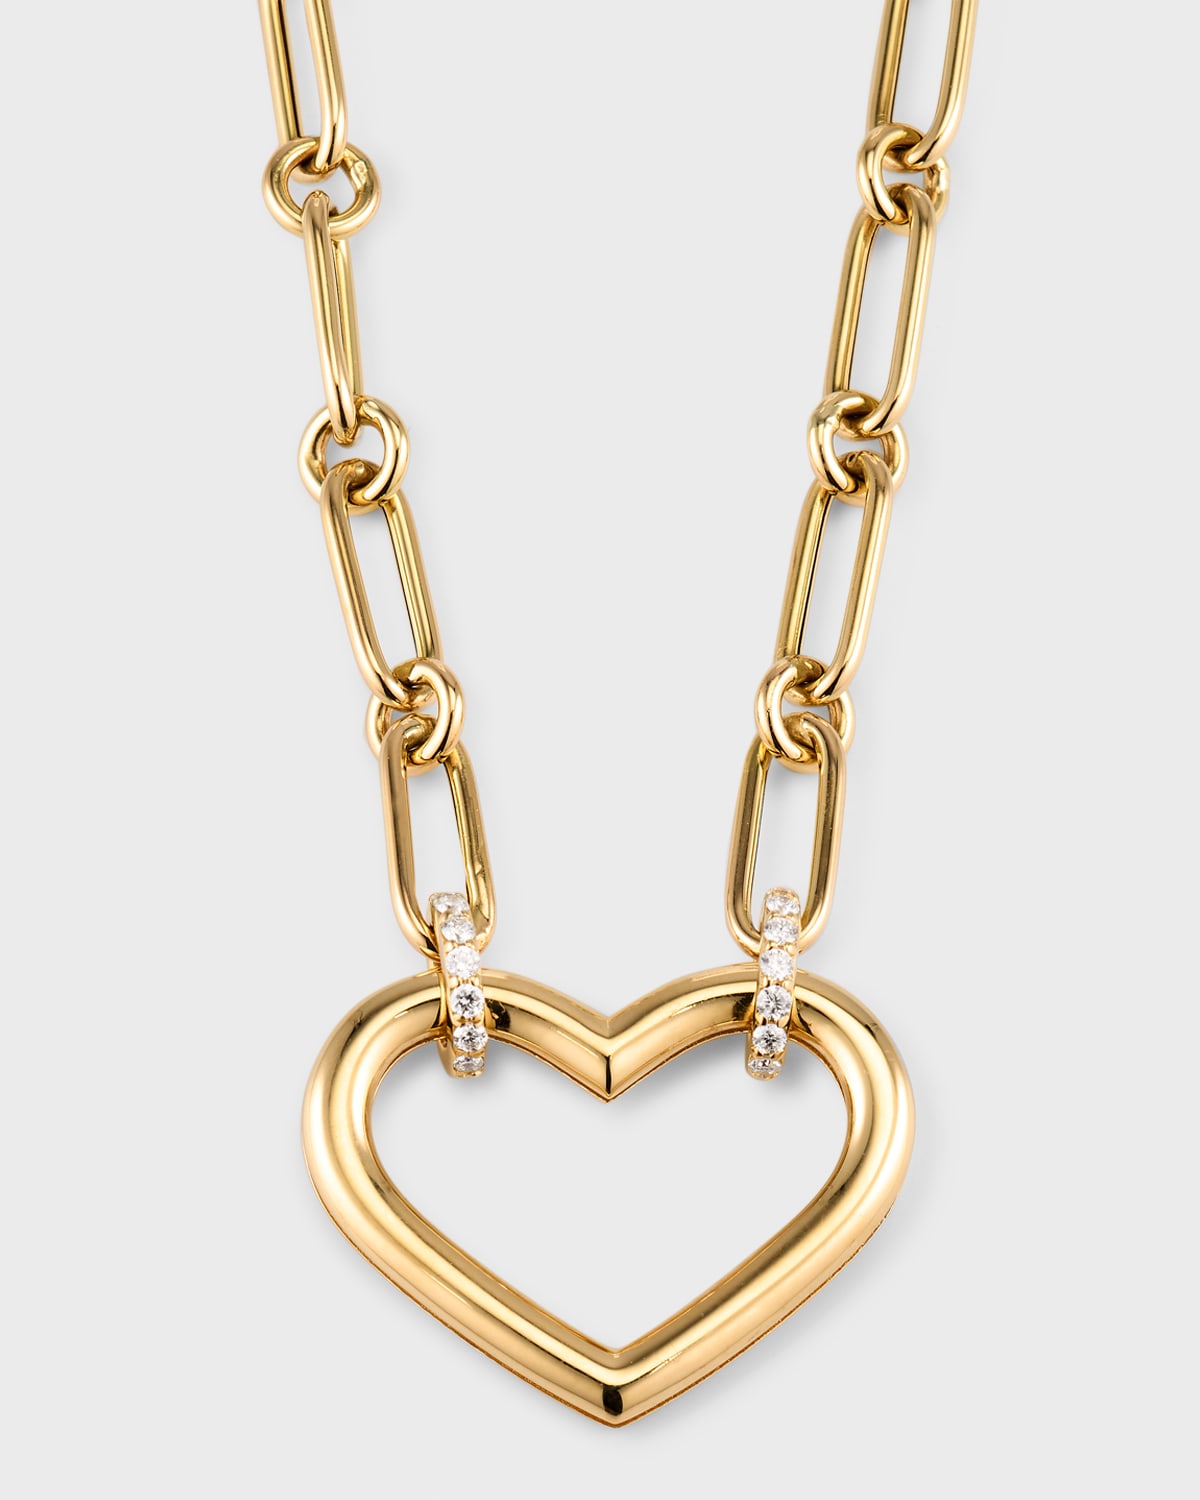 ROBERTO COIN 18K GOLD OPEN HEART ON PAPERCLIP NECKLACE